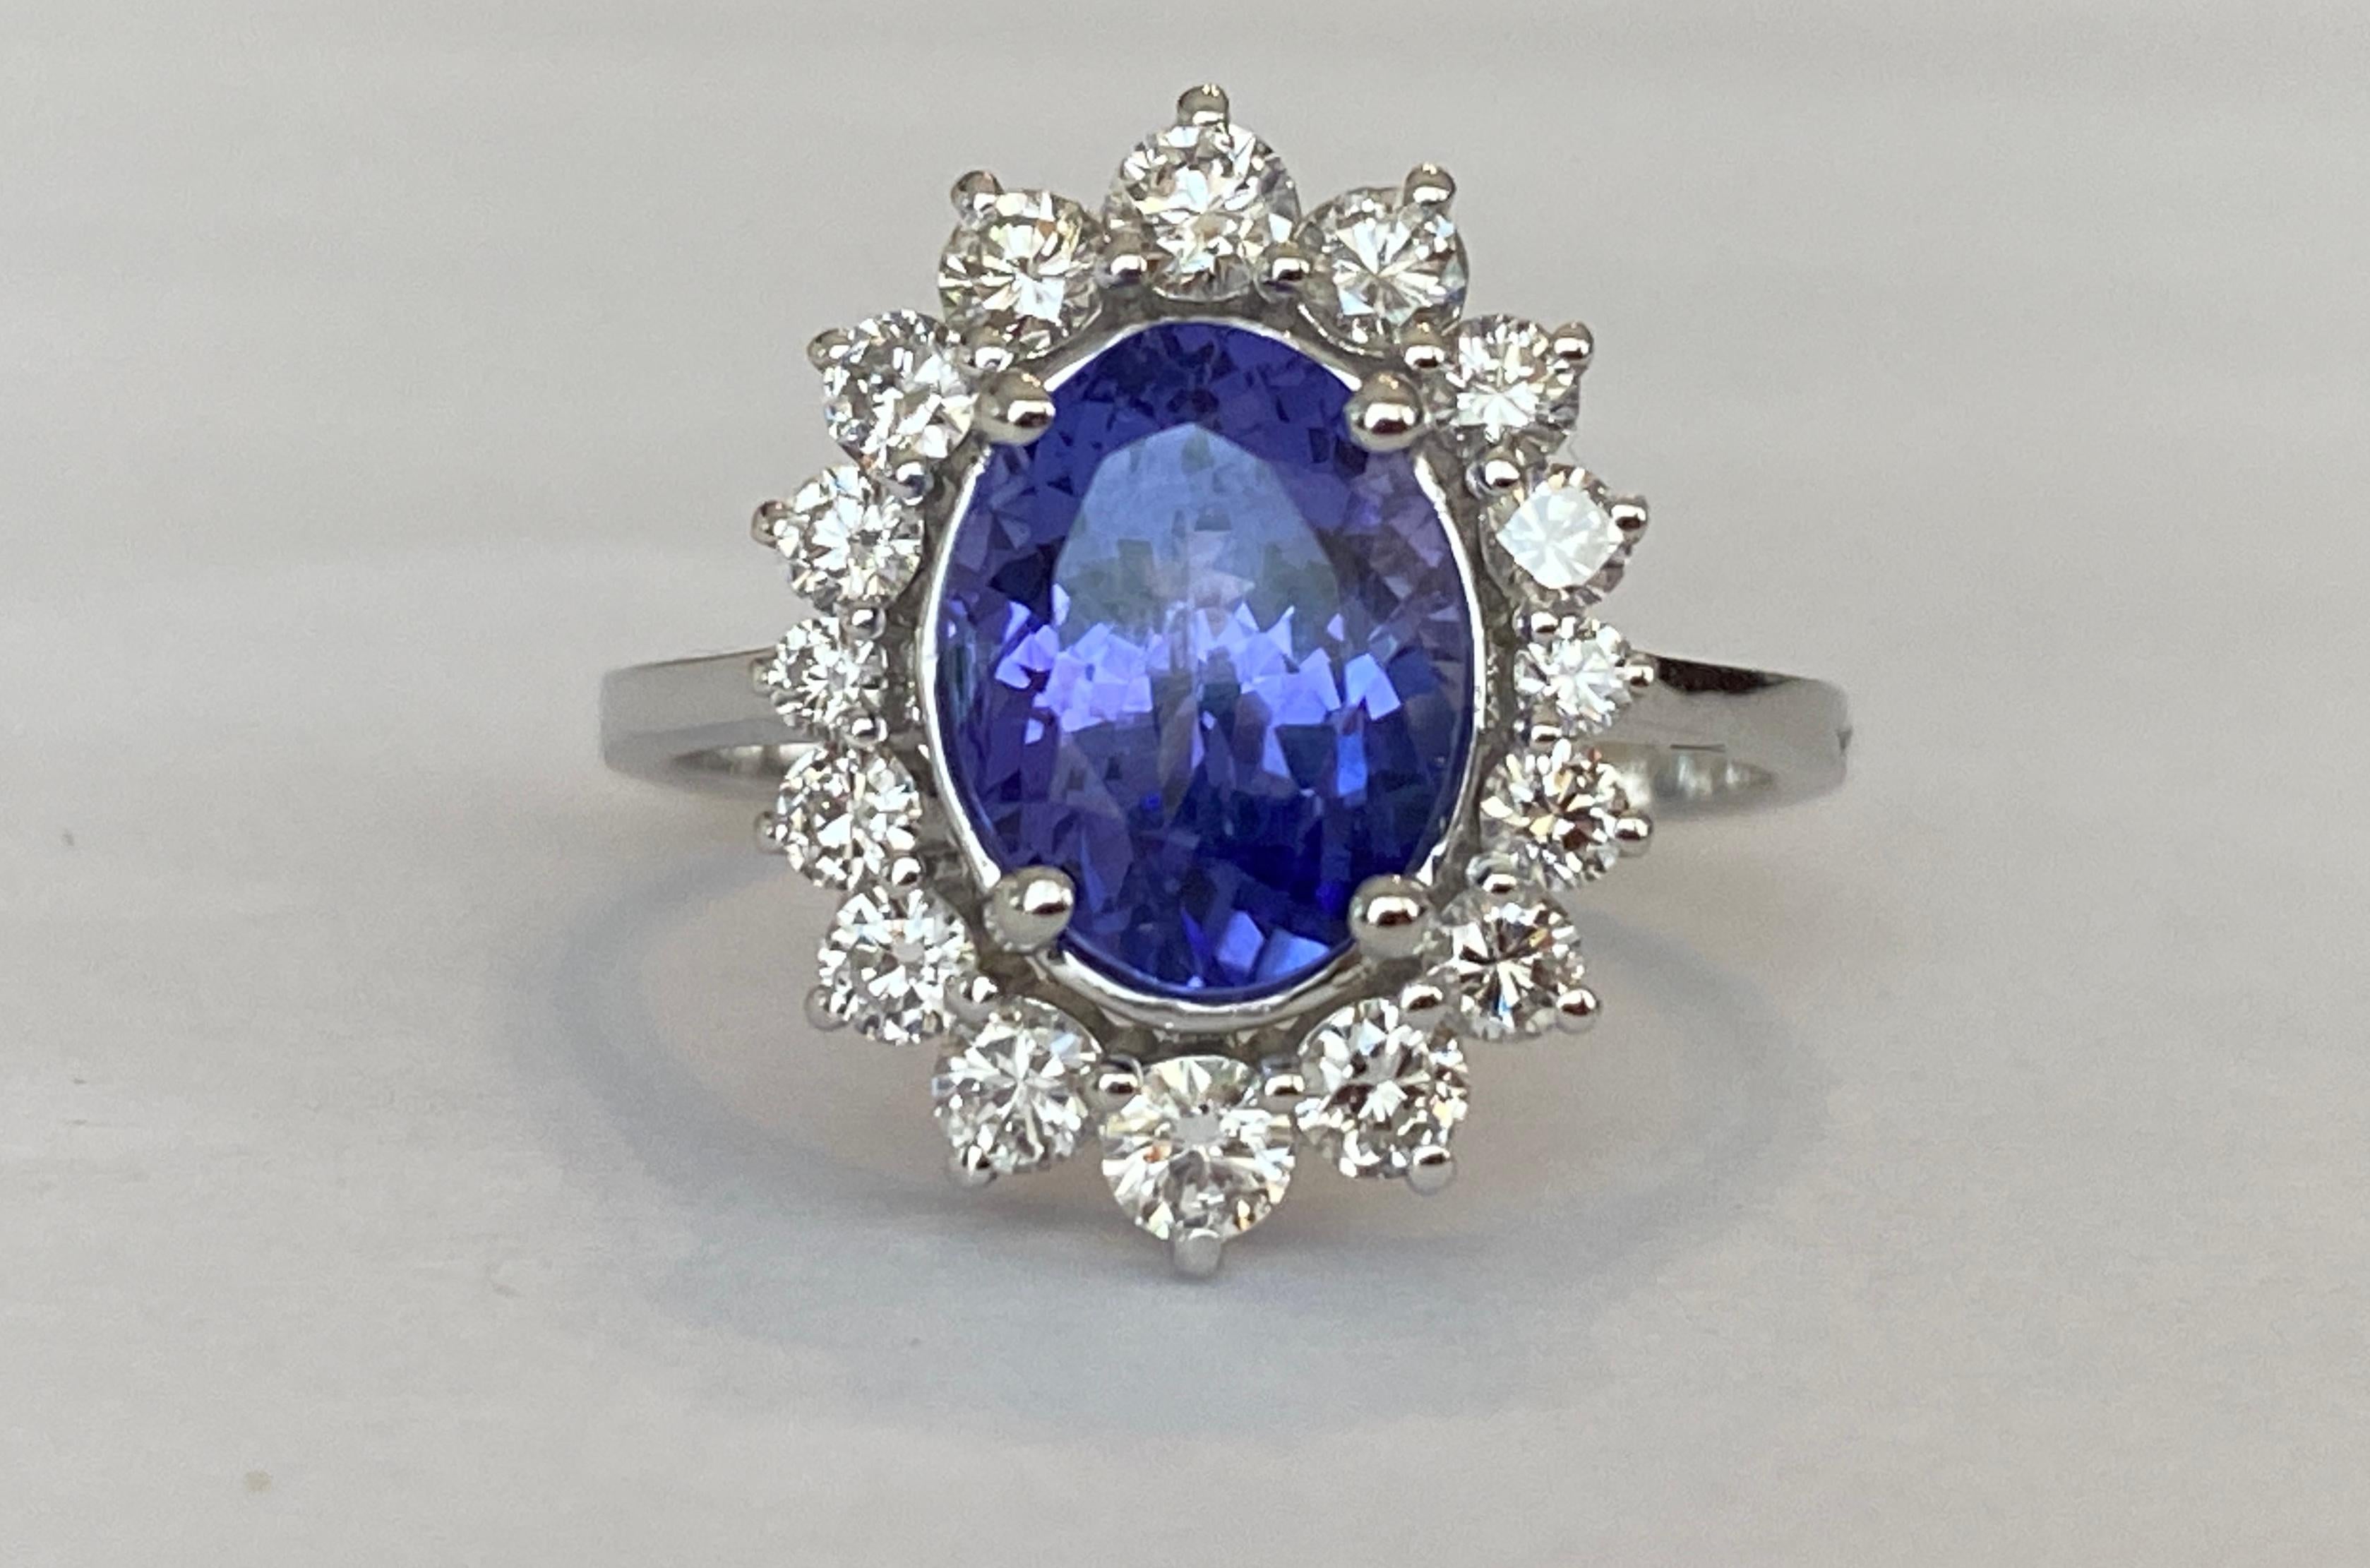 Offered in new  condition, Diana Cocktail ring in white gold, with an oval cut tanzanite of 2.50 ct. The stone is surrounded by an entourage of 16  pieces of brilliant cut diamonds, approx. 0.75 ct in total, of quality F/G/VS/SI. ALGT certificate is